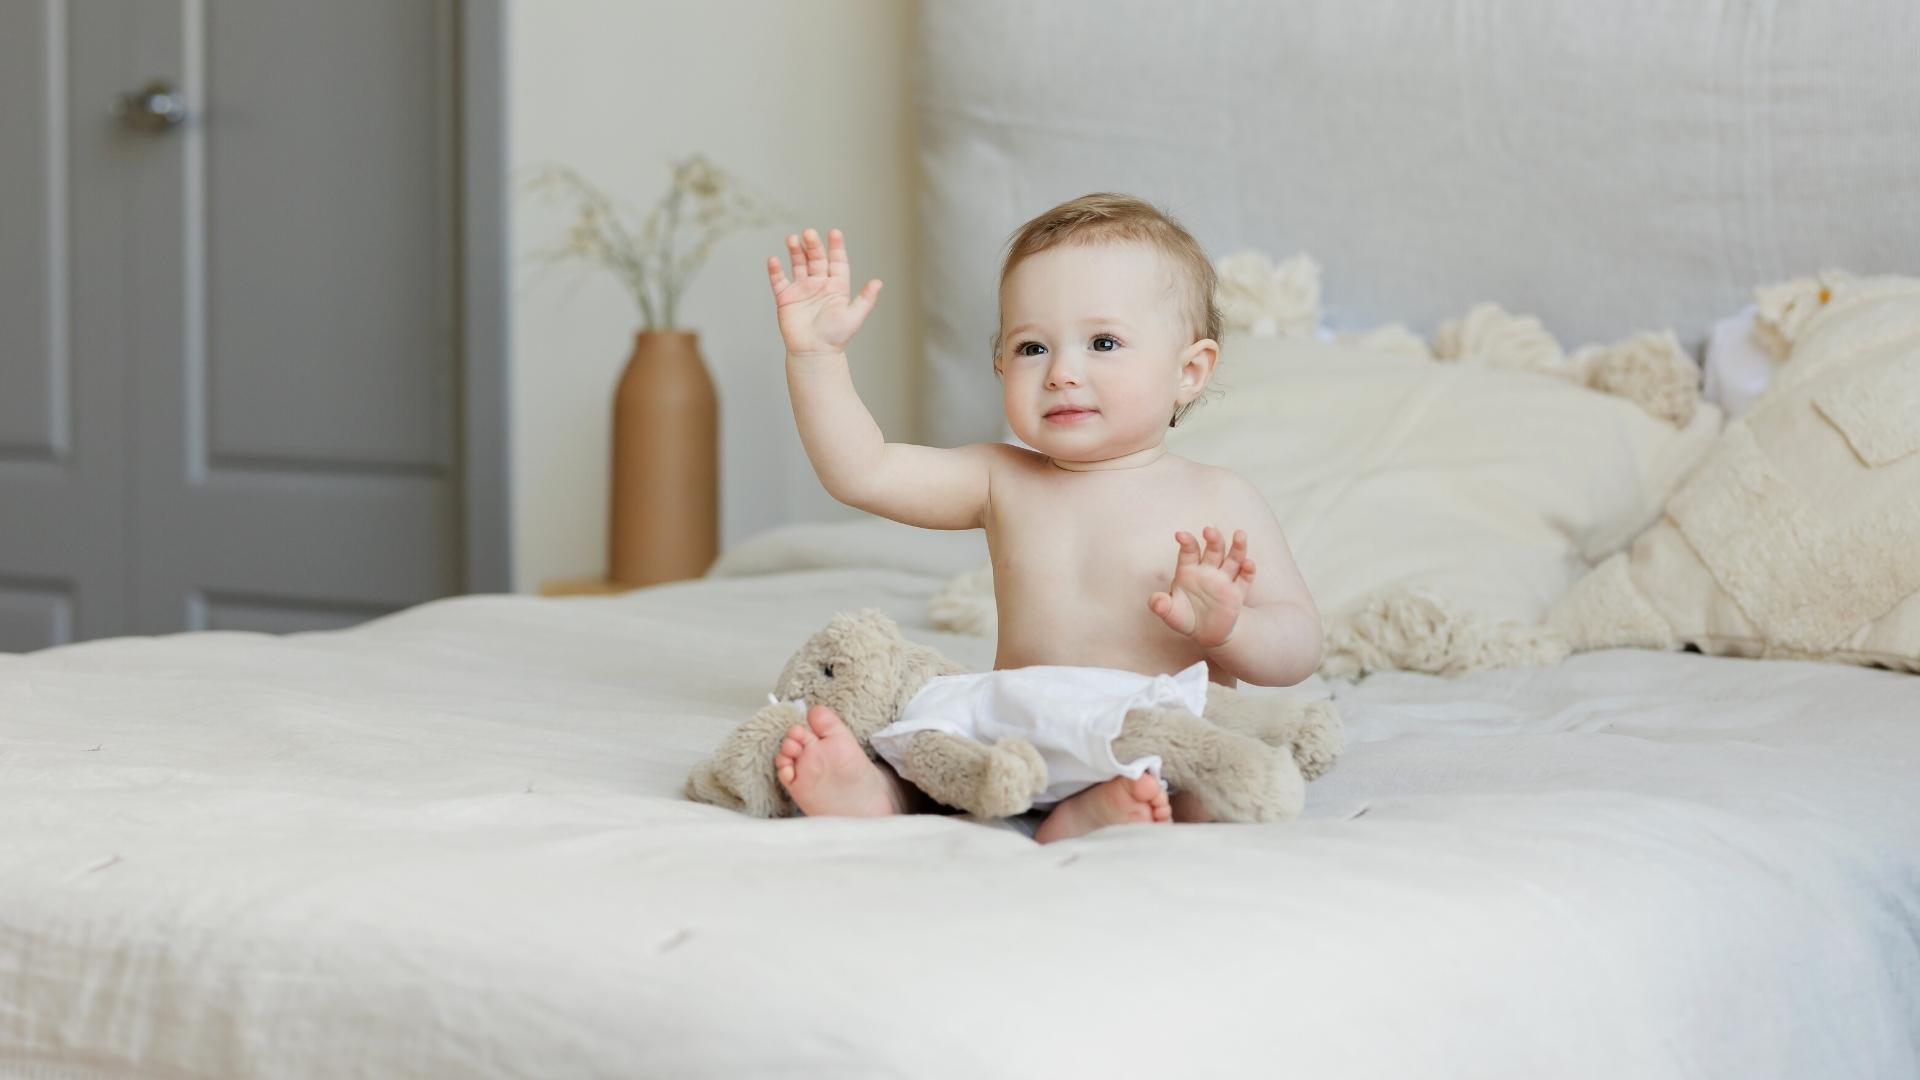 When Do Babies Sit Up From Lying Down? How Can We Help?